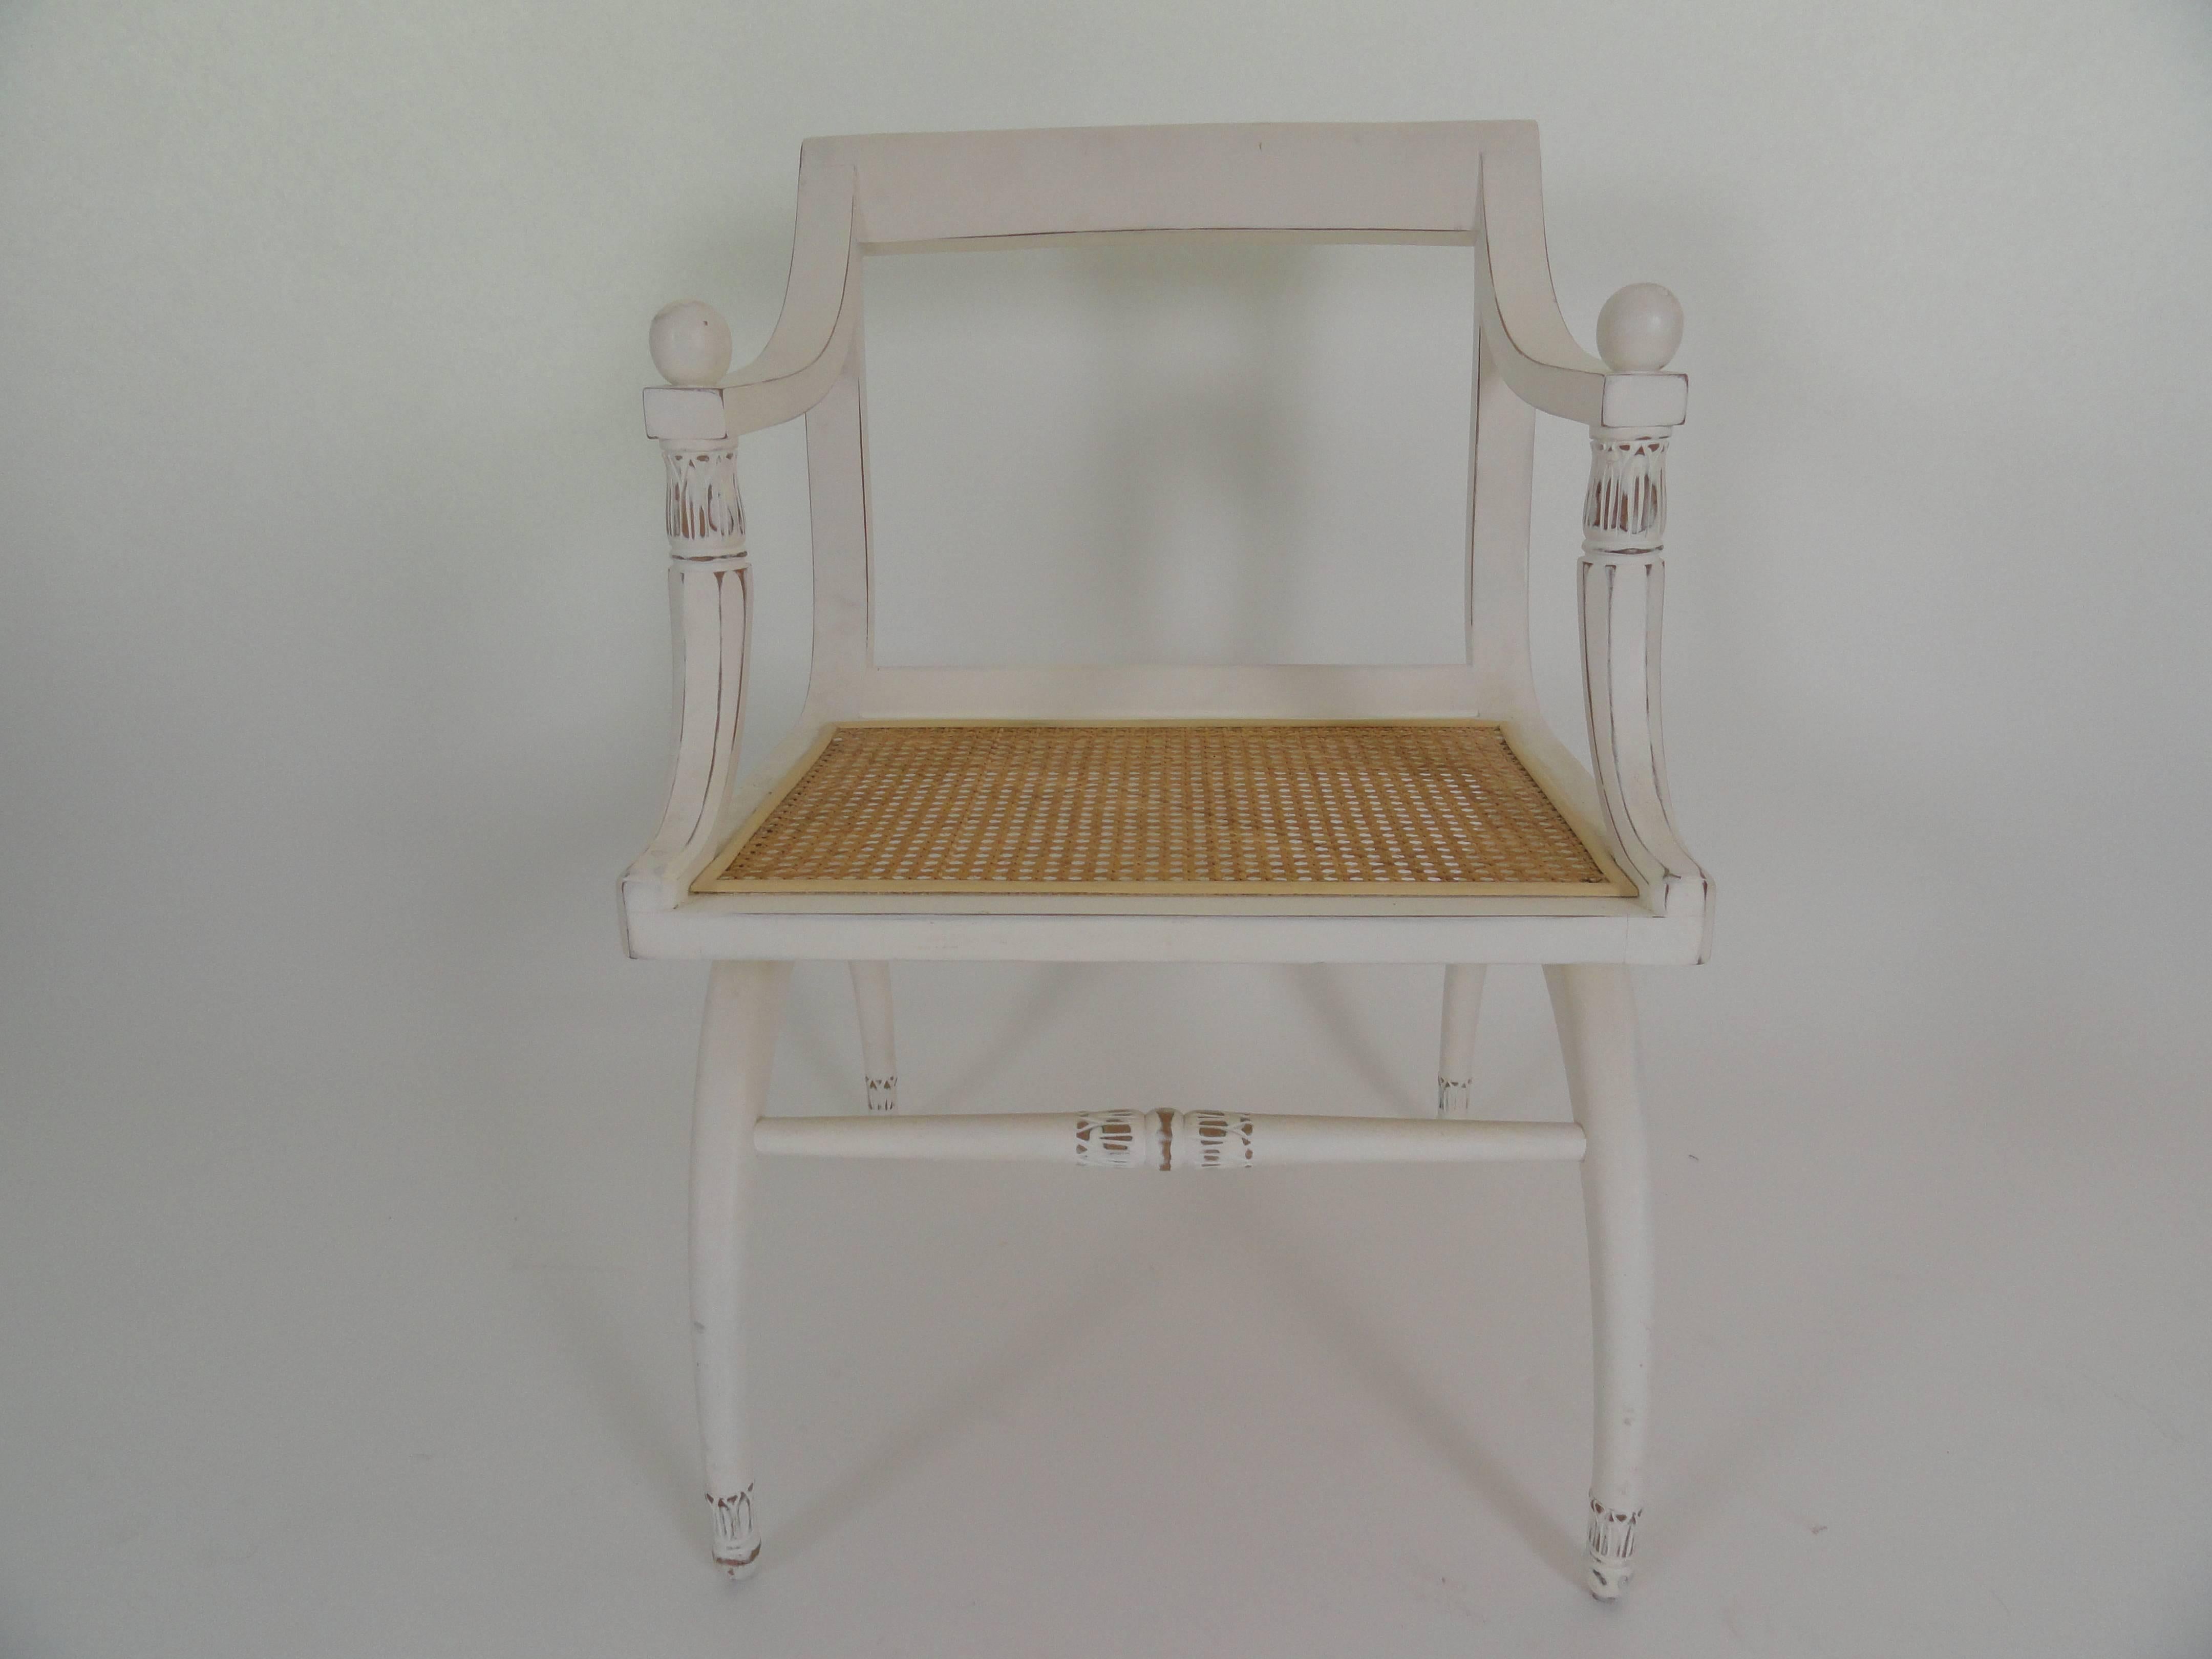 English Regency style cane chair with newly caned seat with white, lightly distressed finish.